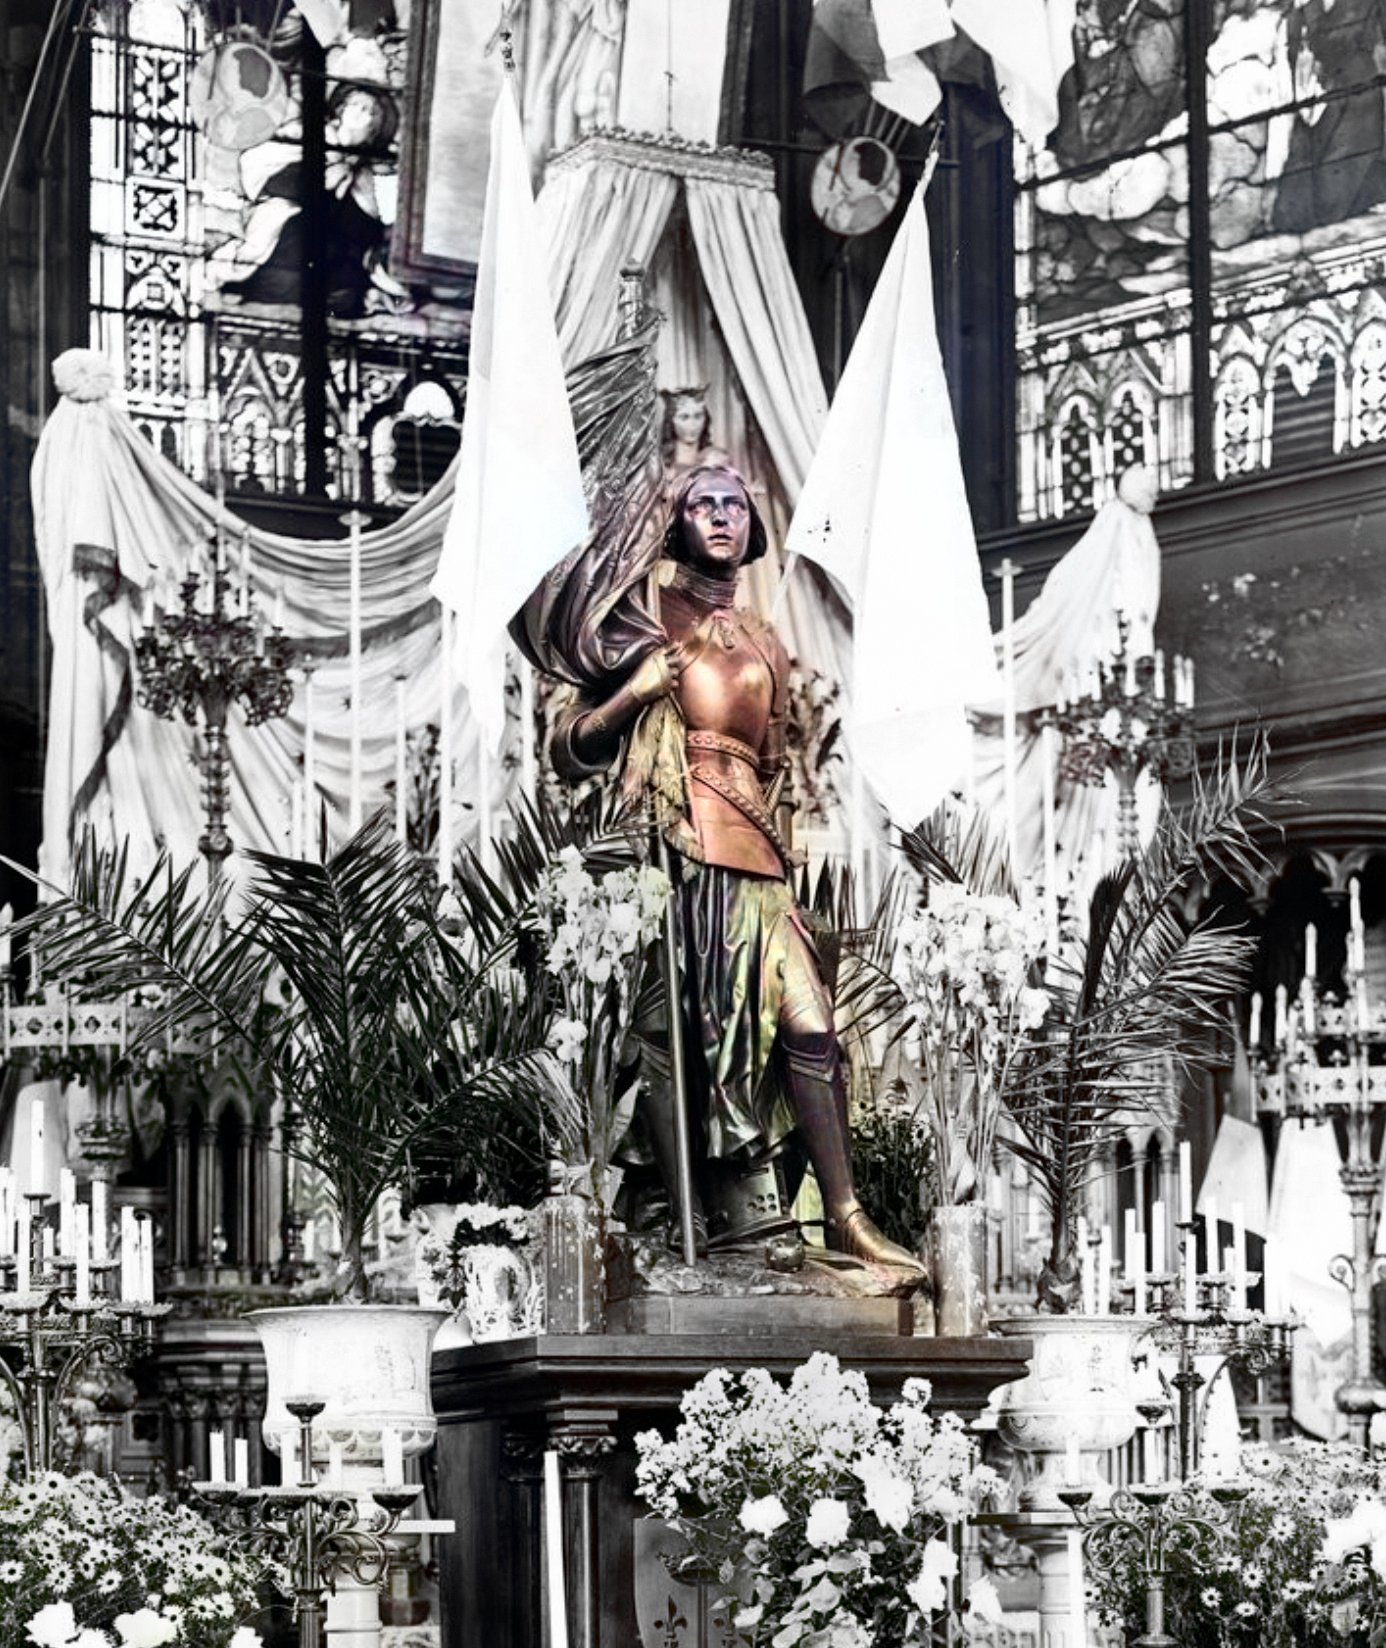 A black and white photo of a statue of Joan of Arc holding a banner at a church. The statue is on a pedestal surrounded by white flowers and candles. The background consists of a stained glass window and a large organ.